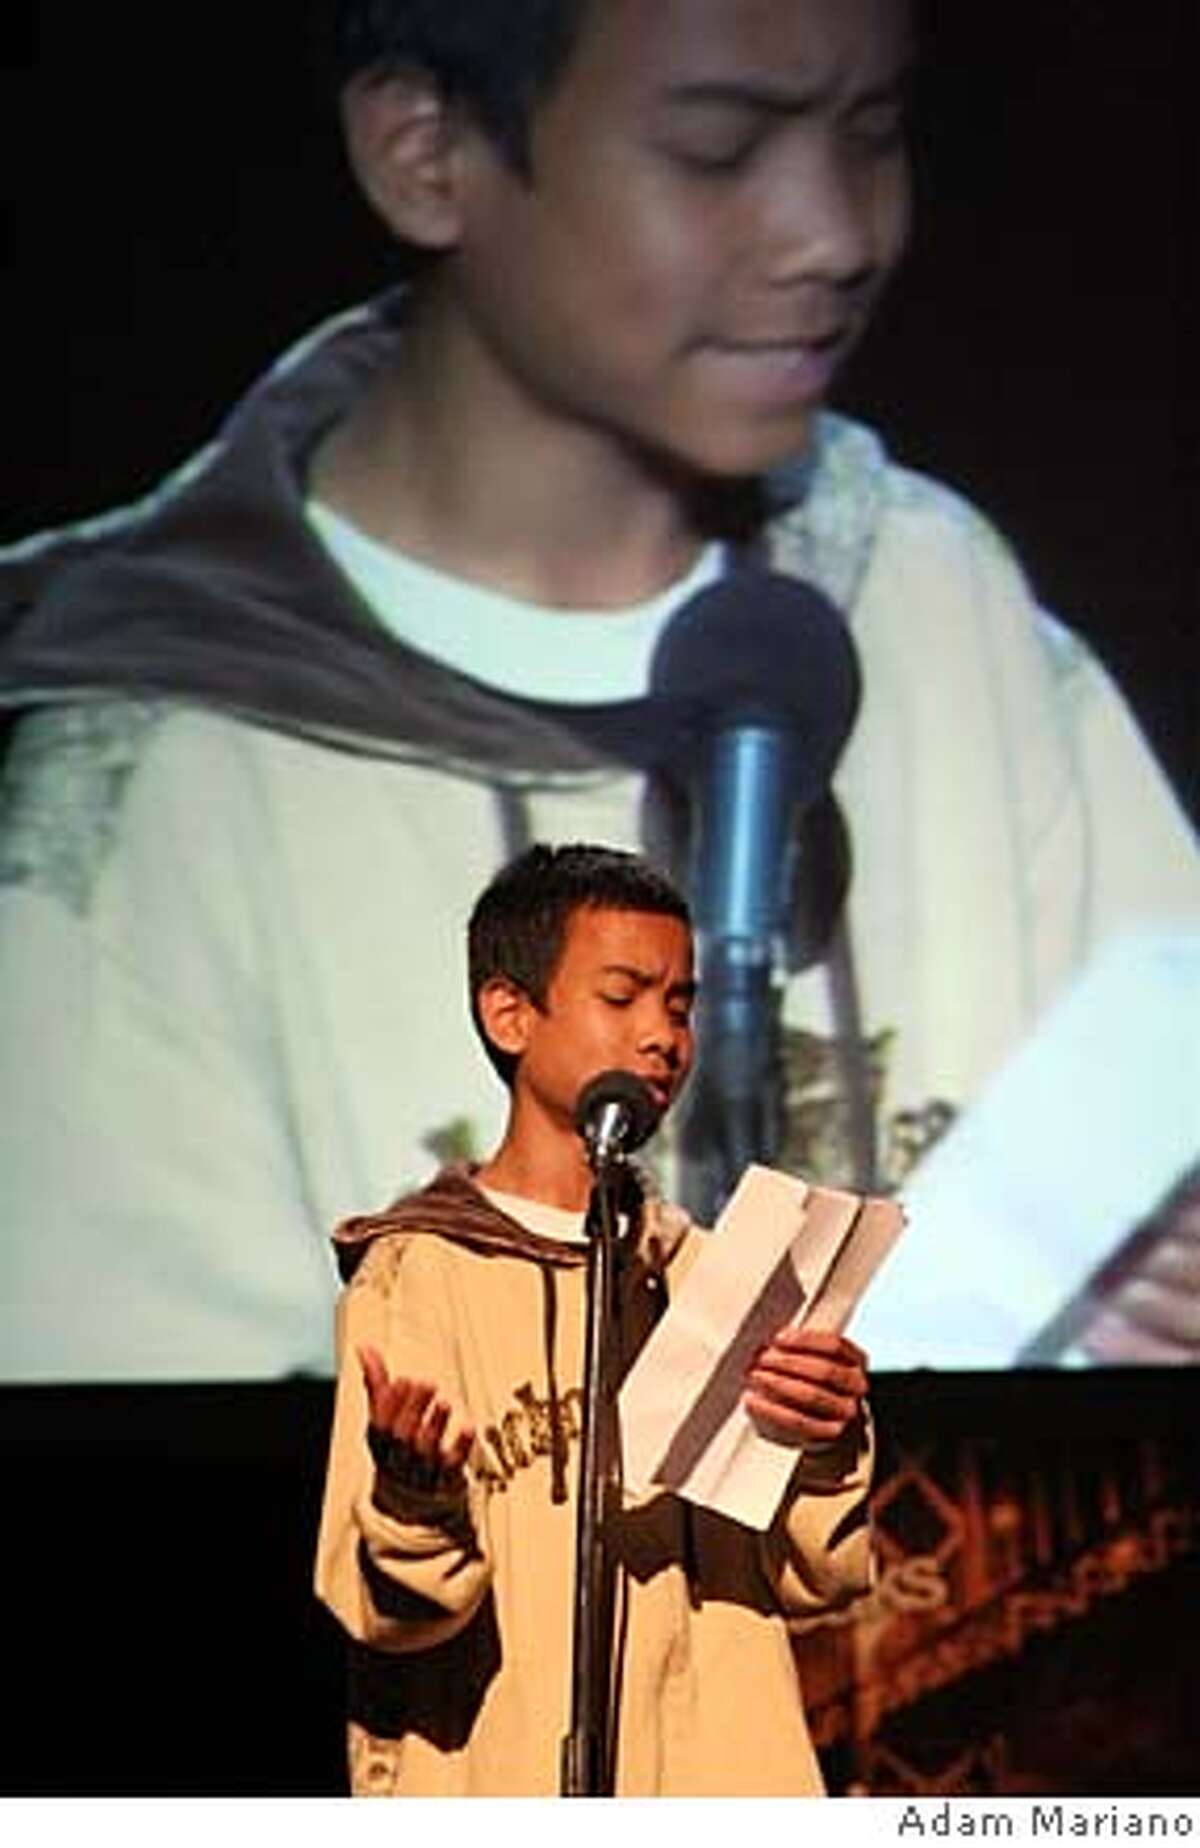 ###Live Caption:Christsna Sot, 14, of Oakland took part in the Youth Speaks Poetry Slam in March 2008###Caption History:Christsna Sot, 14, of Oakland took part in the Youth Speaks Poetry Slam in March 2008###Notes:###Special Instructions: